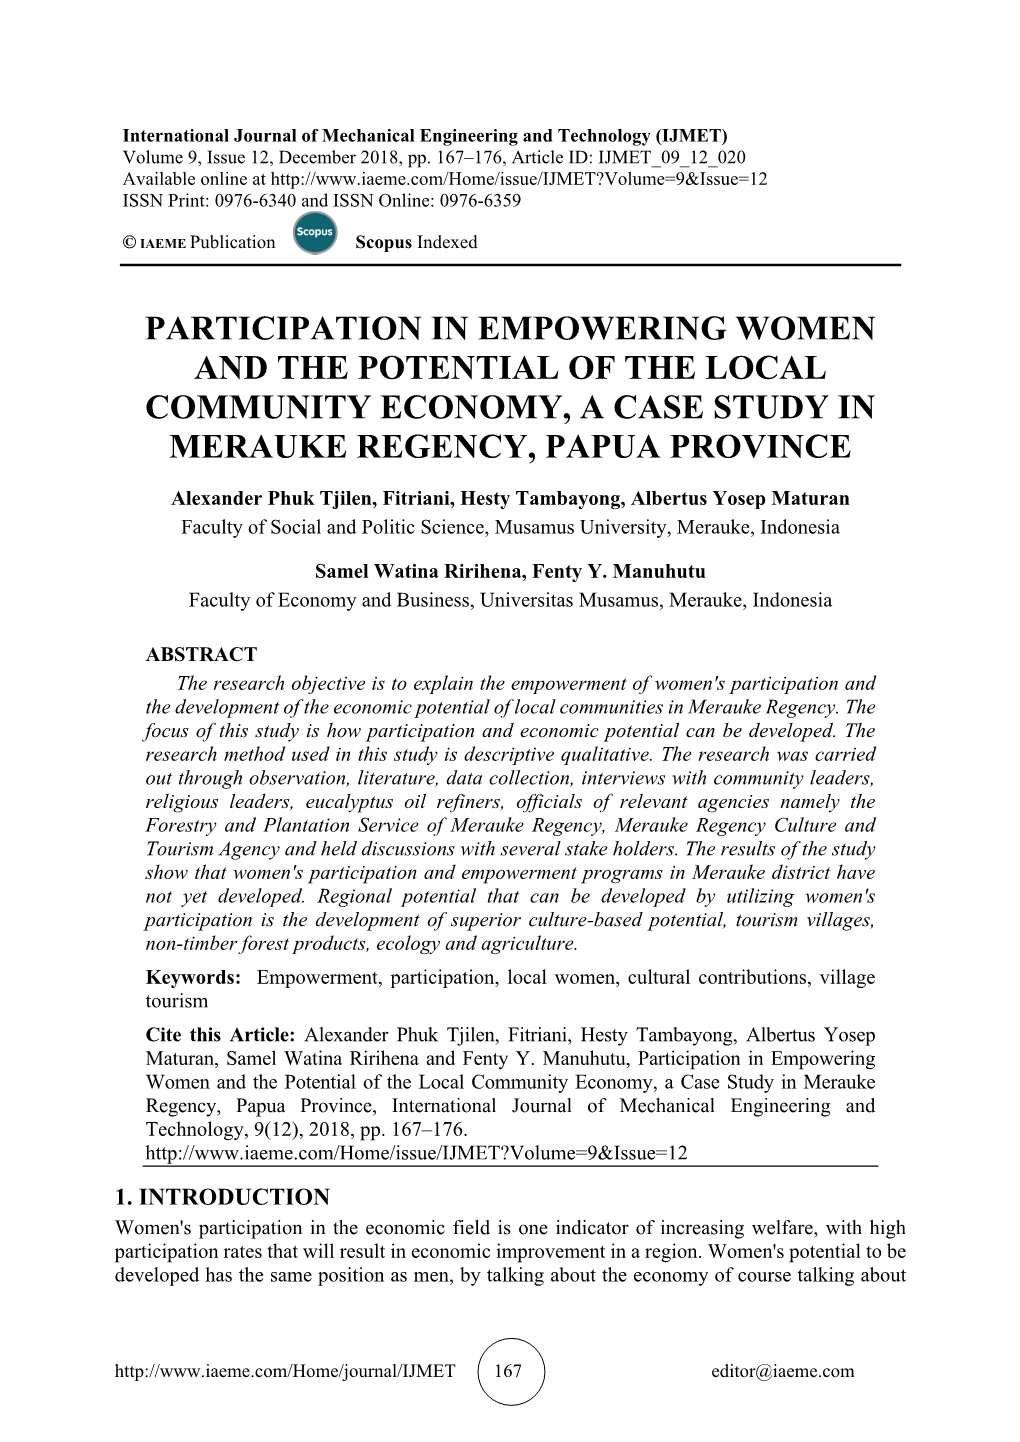 Participation in Empowering Women and the Potential of the Local Community Economy, a Case Study in Merauke Regency, Papua Province